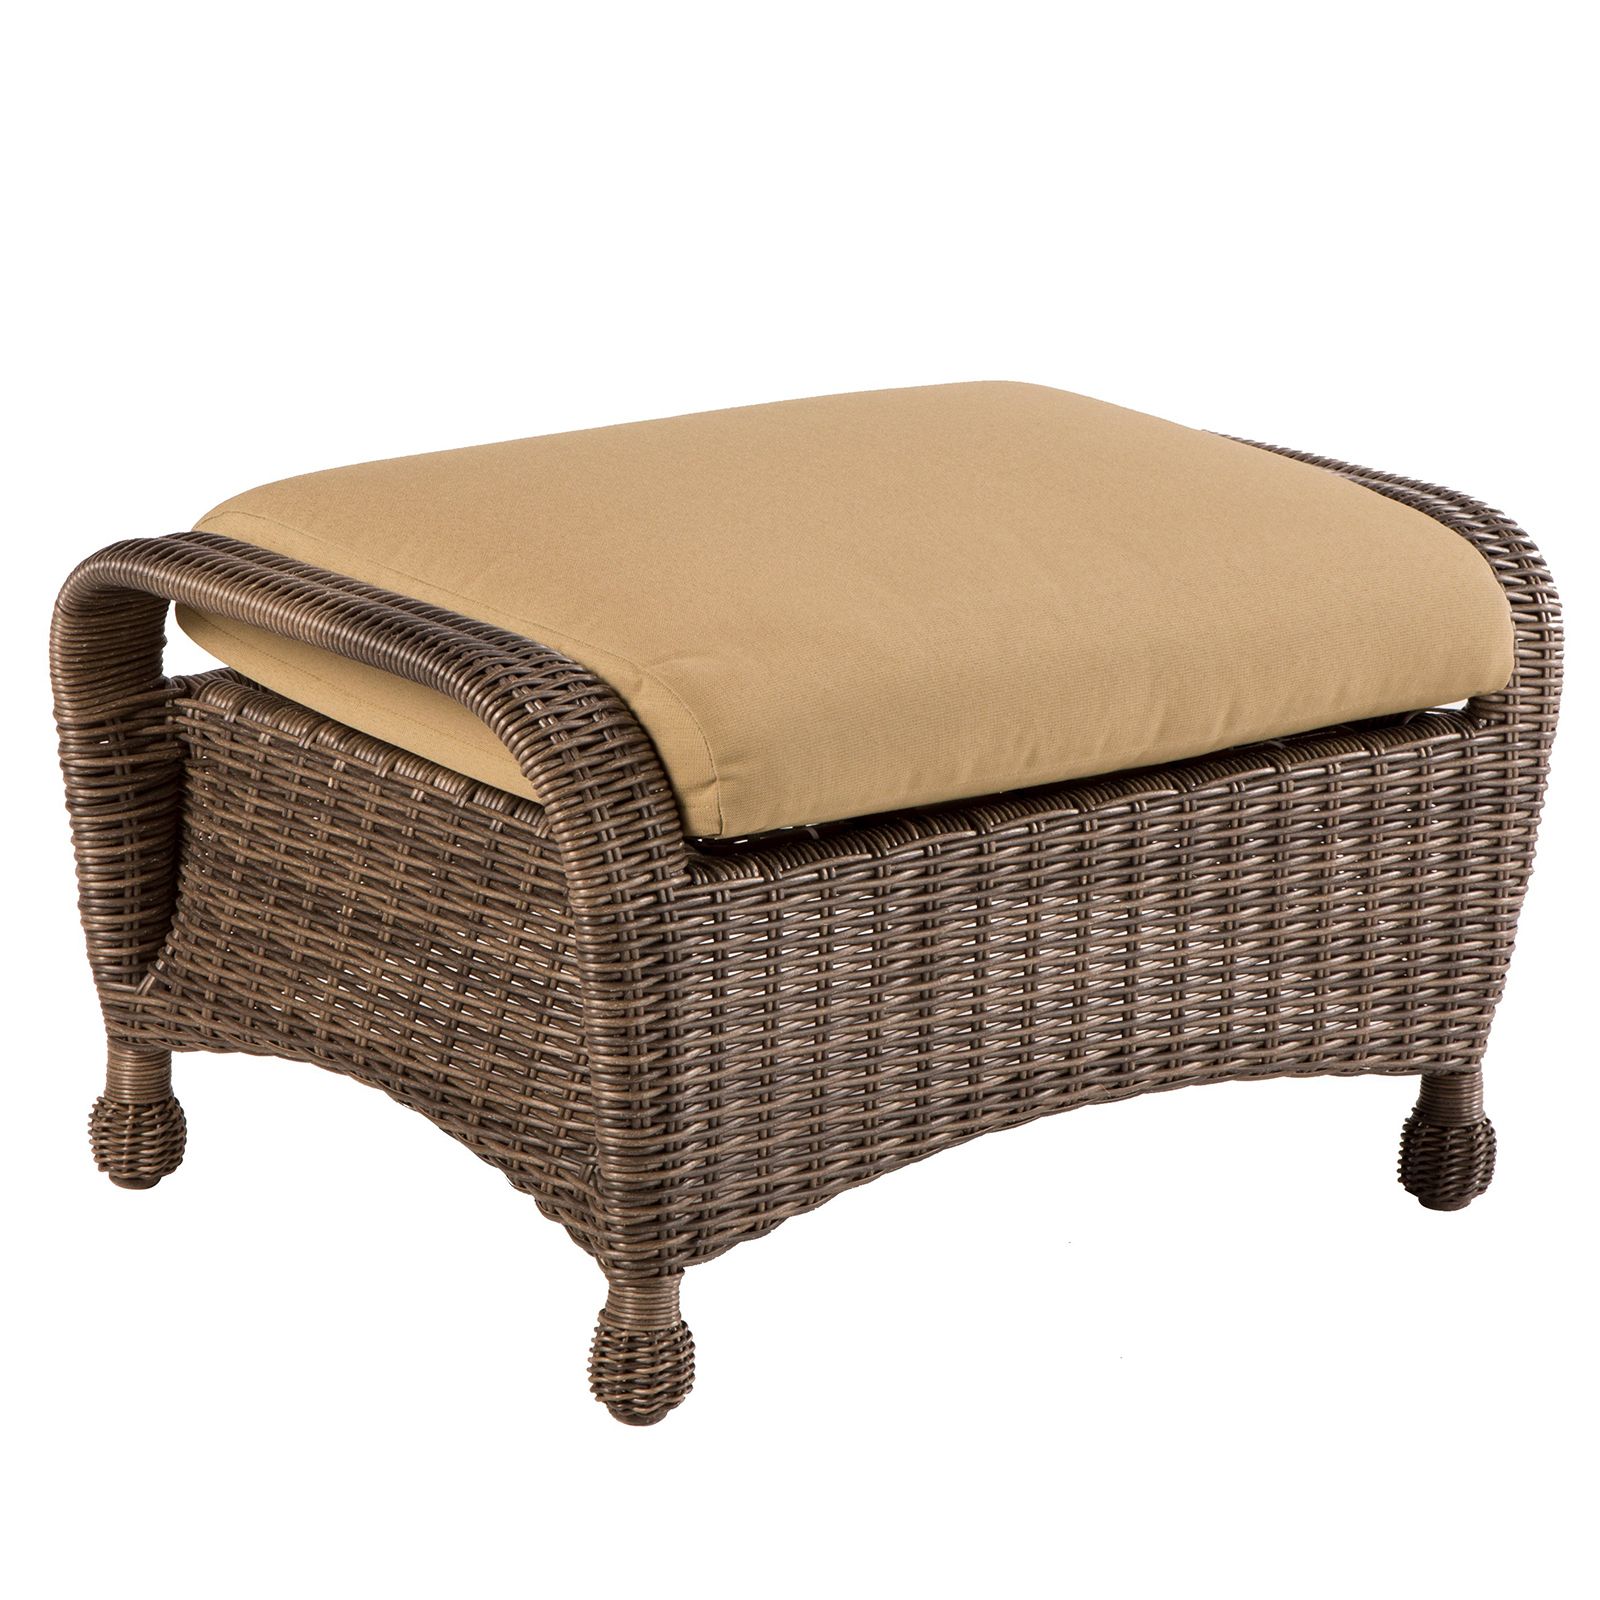 North Mowing All Weather Wicker Ottoman At Hayneedle With Woven Pouf Ottomans (View 1 of 20)